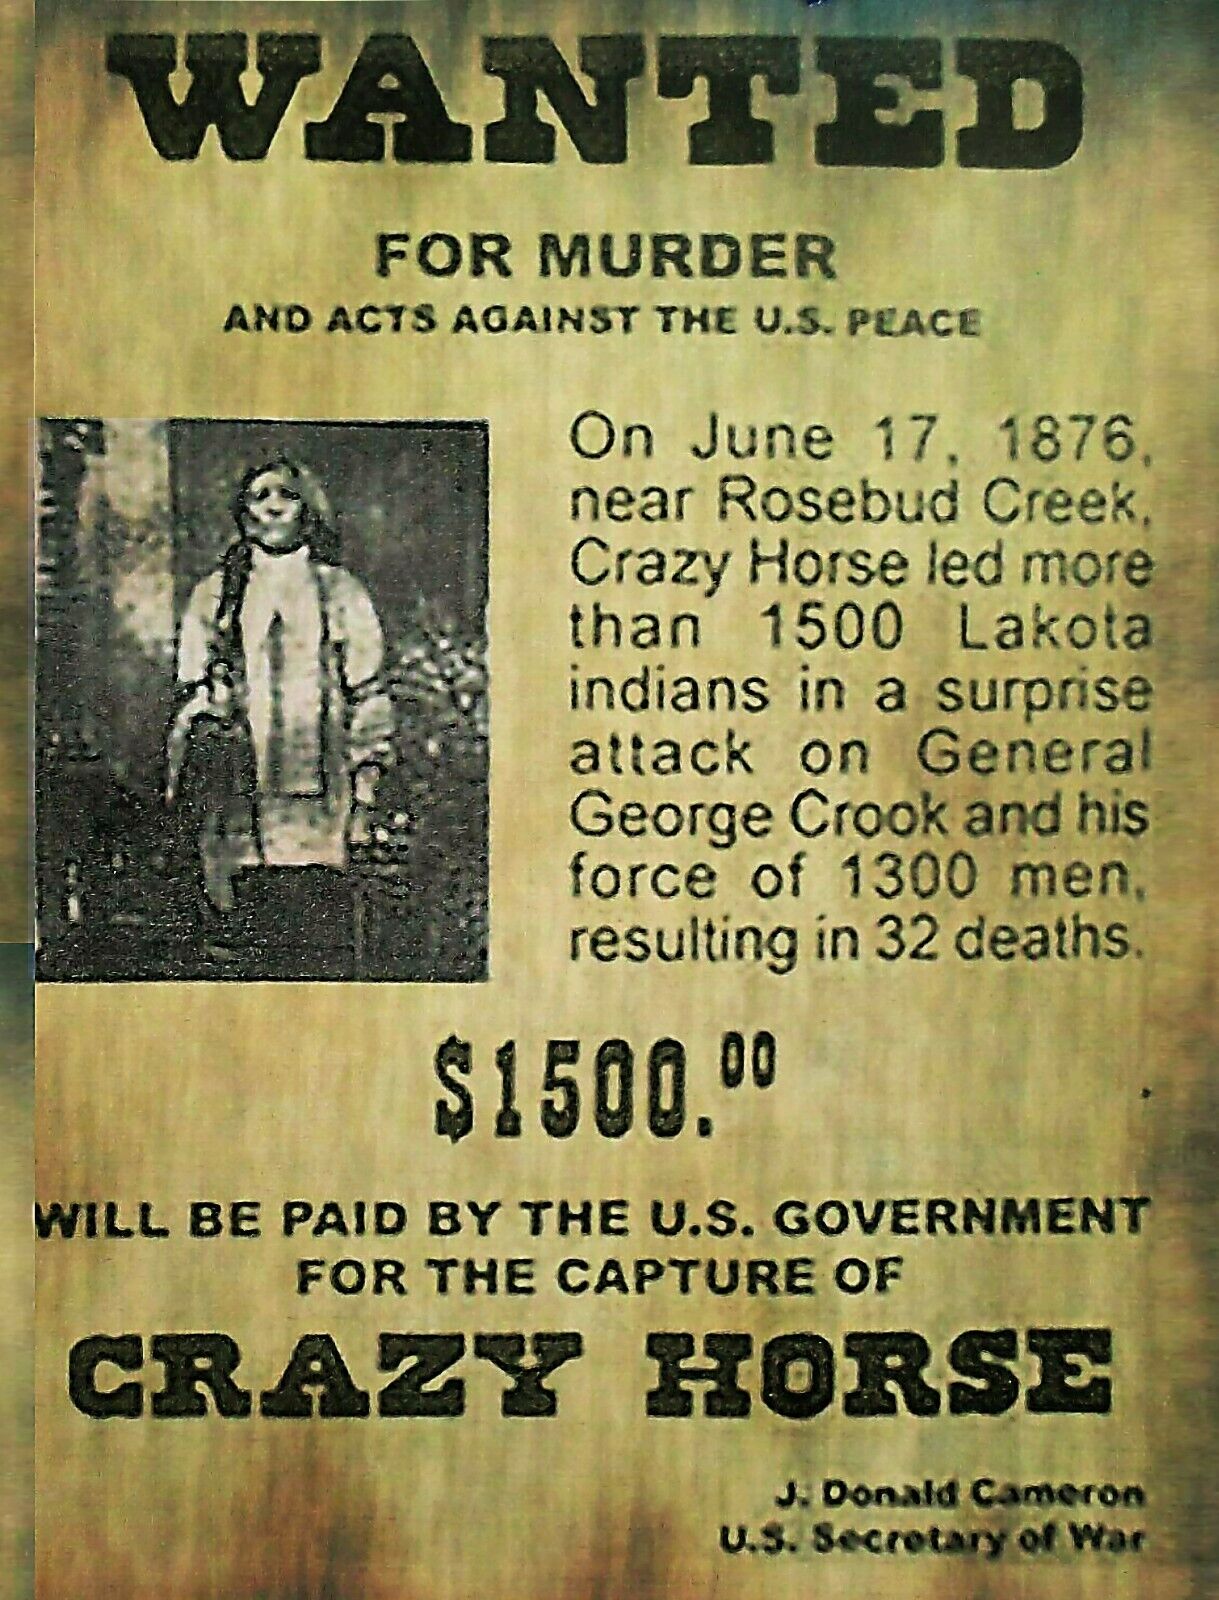 1876 CRAZY HORSE 8.5X11 WANTED POSTER PHOTO ORIGINAL CUSTER LAST STAND REPRINT